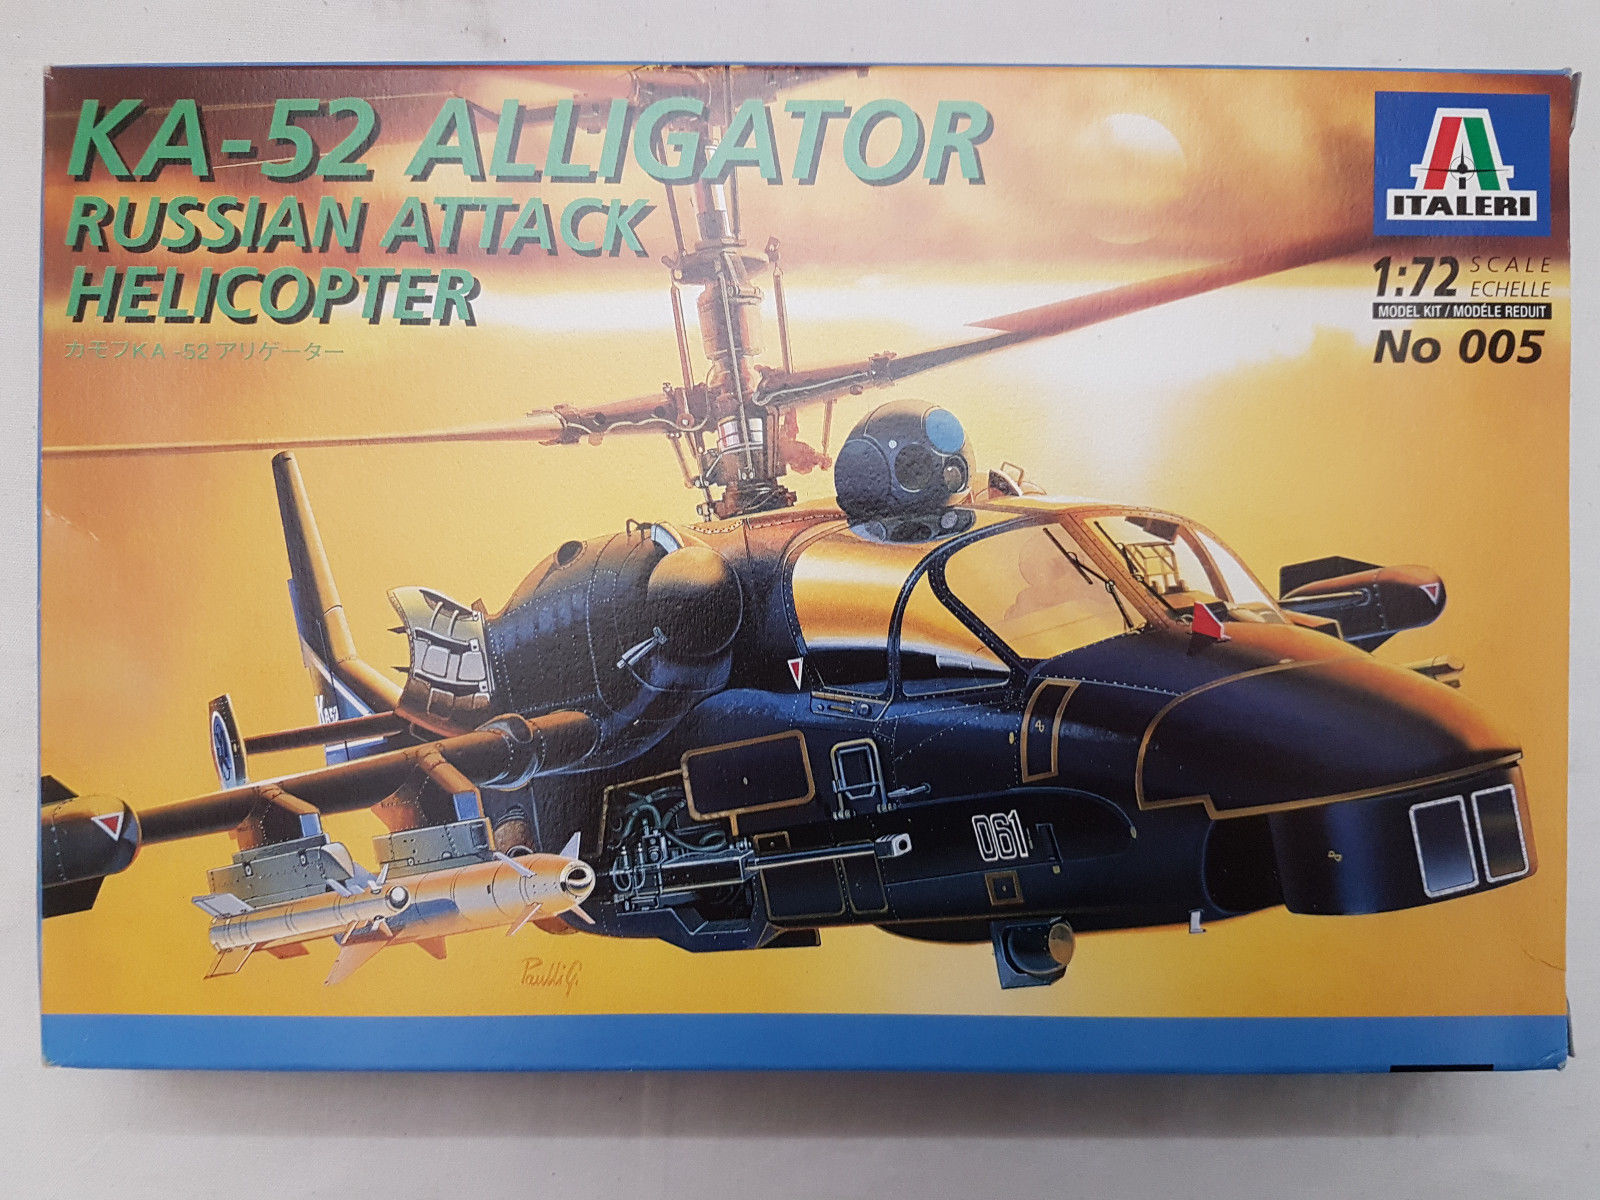 KA-52 ALLIGATOR RUSSIAN ATTACK HELICOPTER 